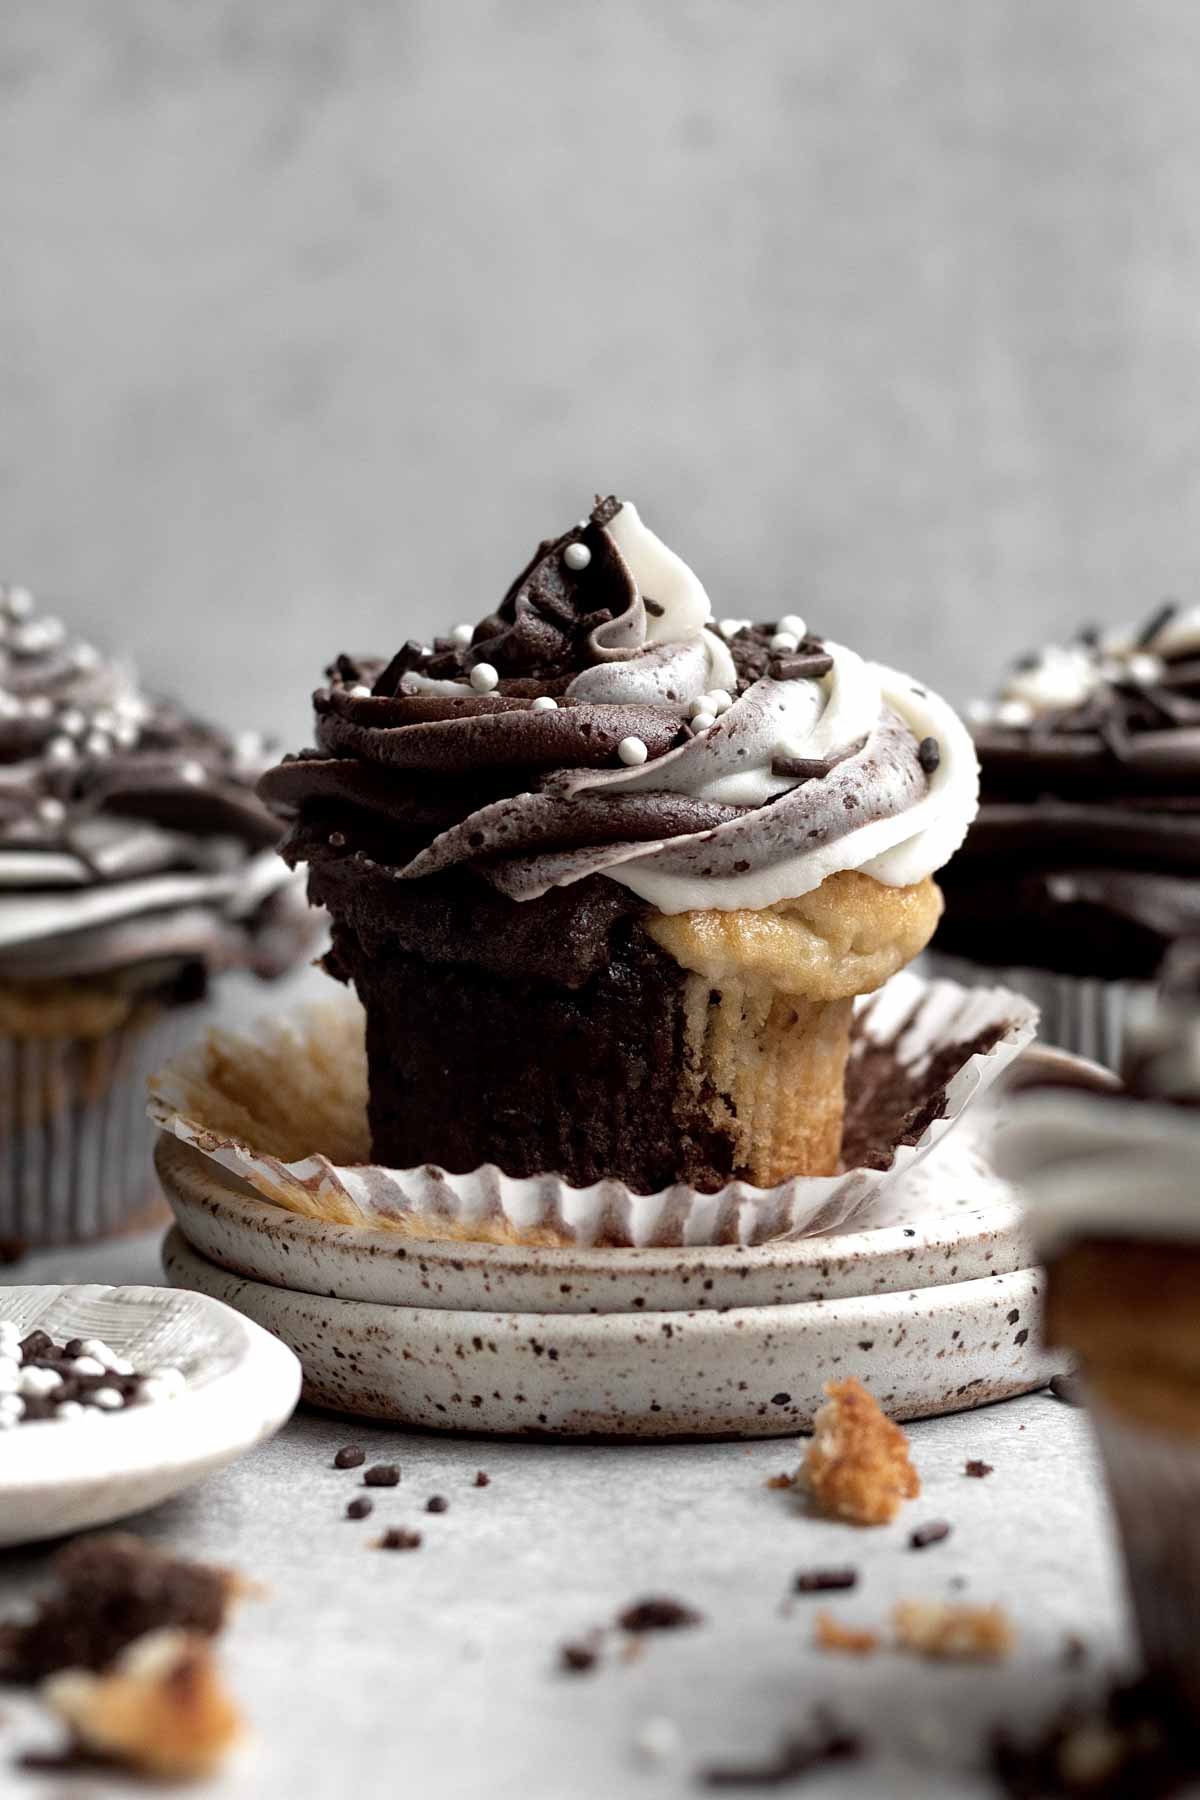 A Chocolate and Vanilla Cupcake with chocolate vanilla icing and round white sprinkles.